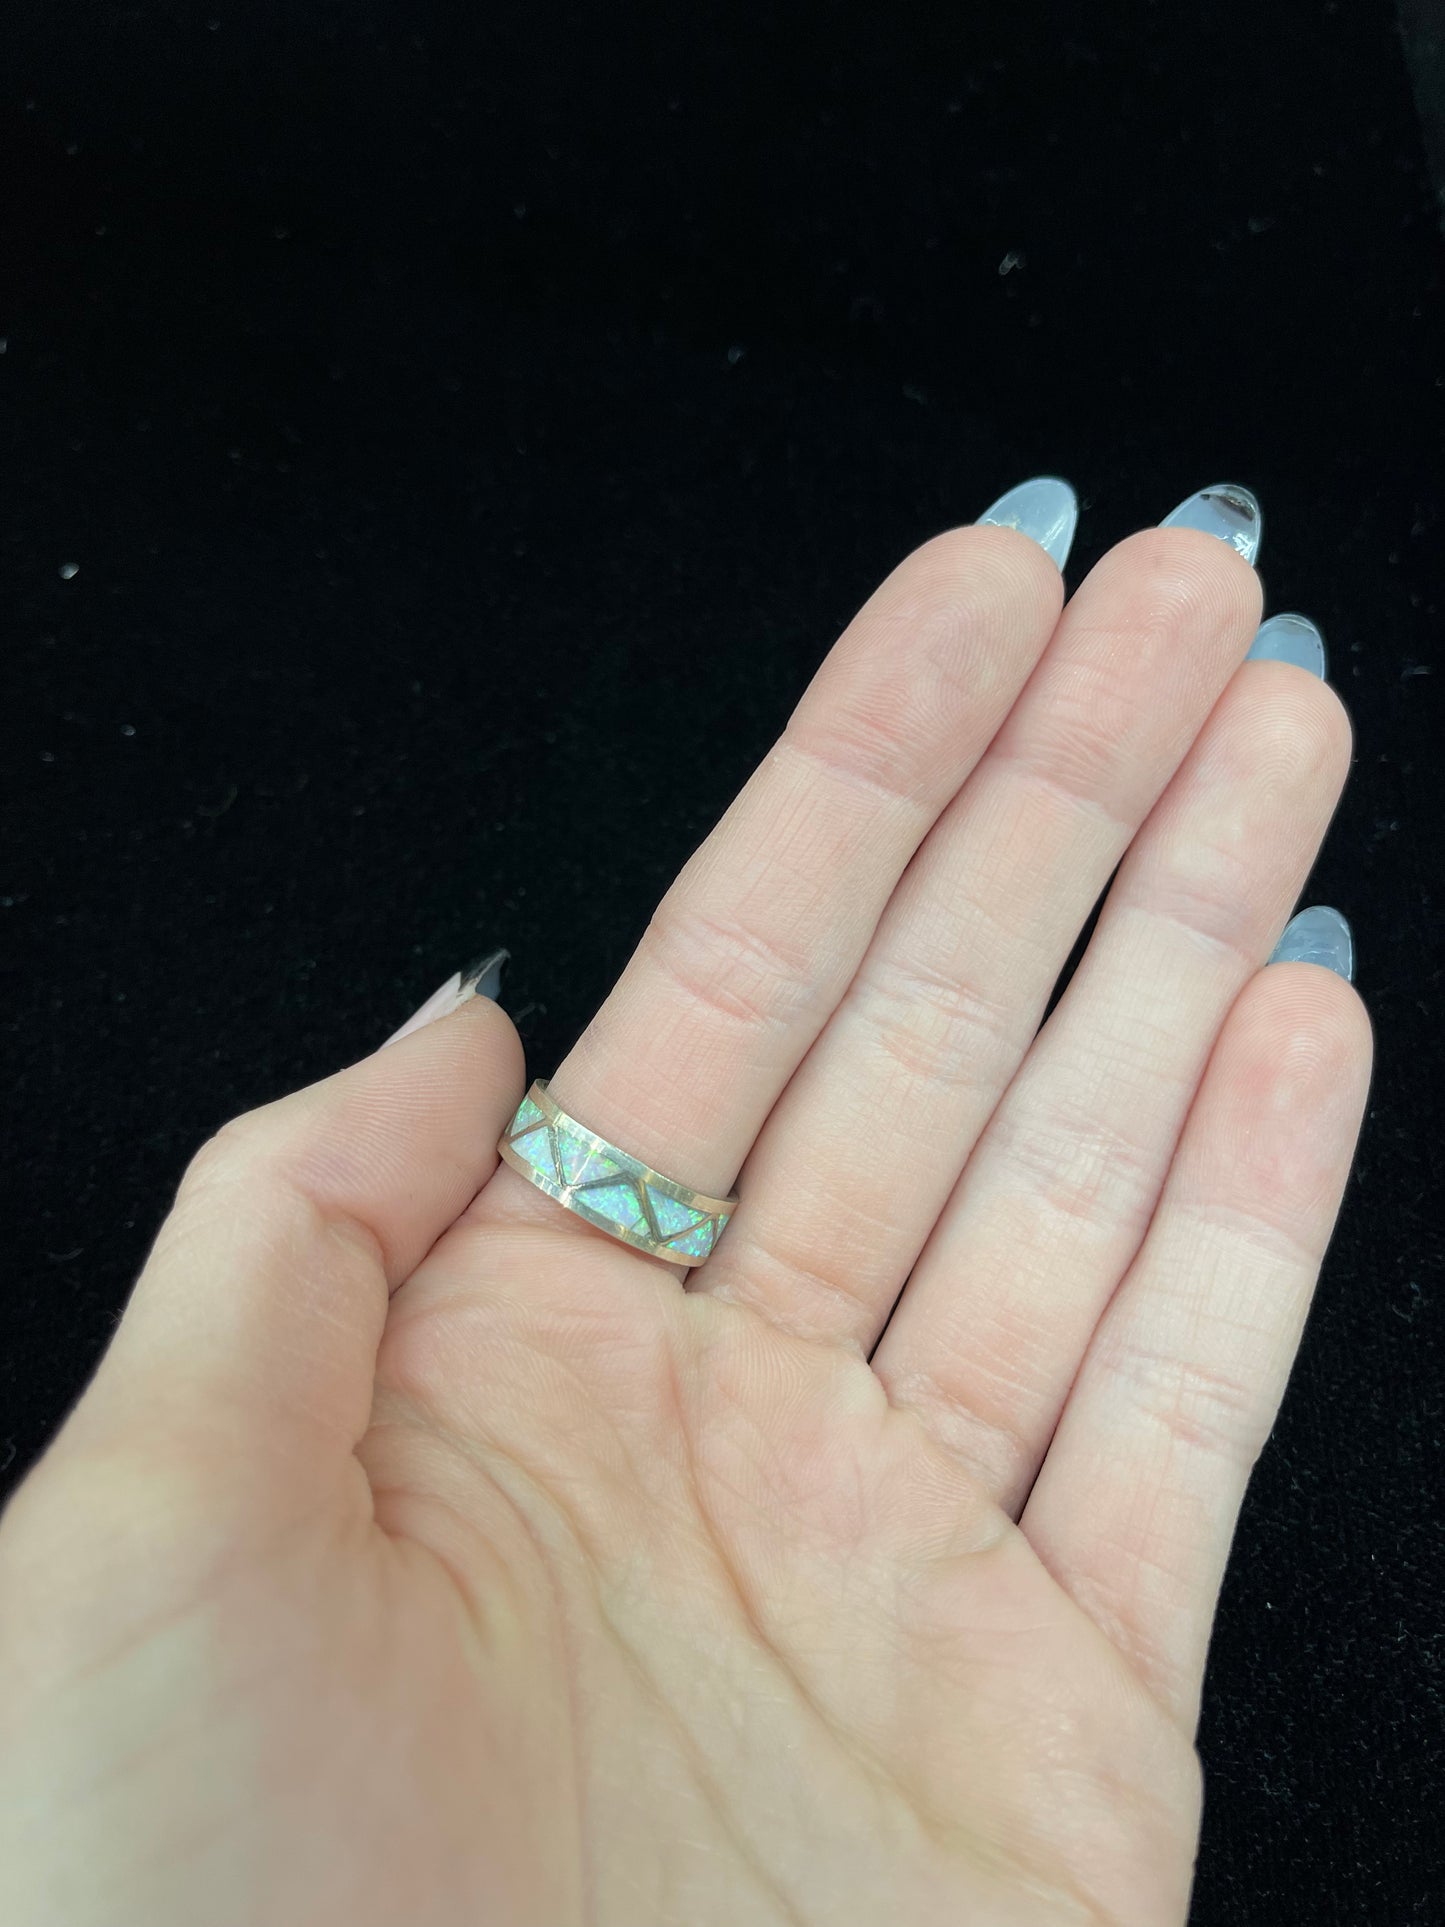 6.0 White Opal Inlay Ring